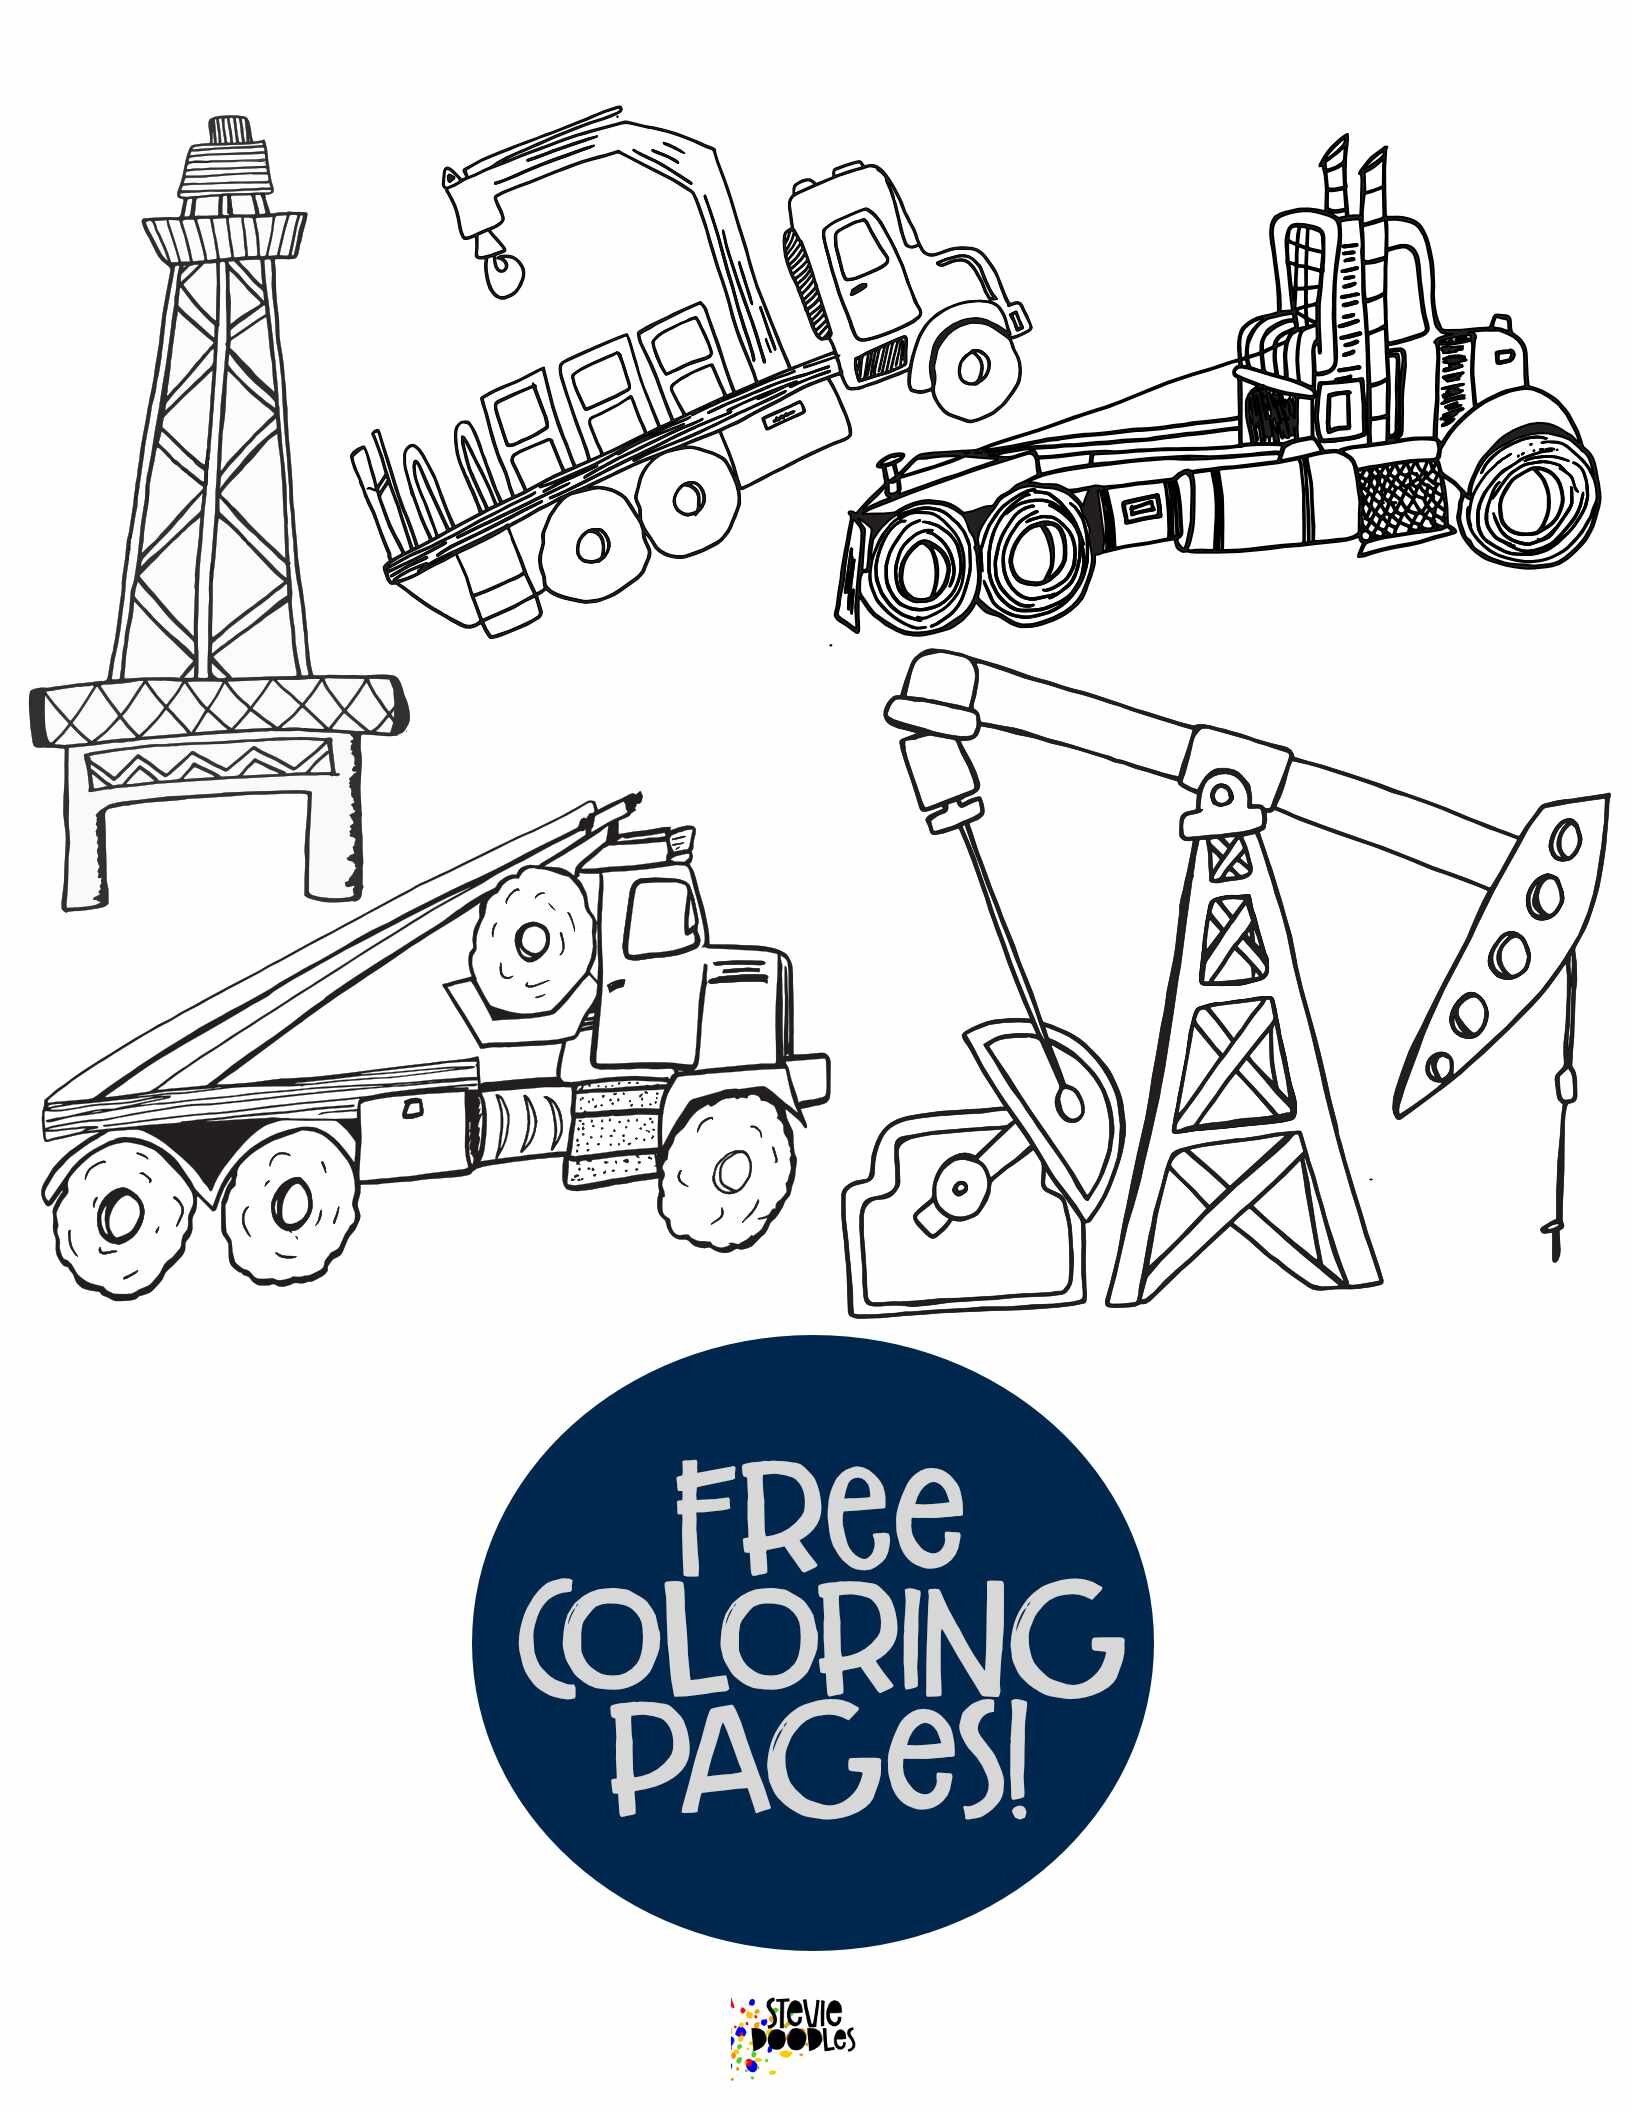 Bunch of Rigs free  page